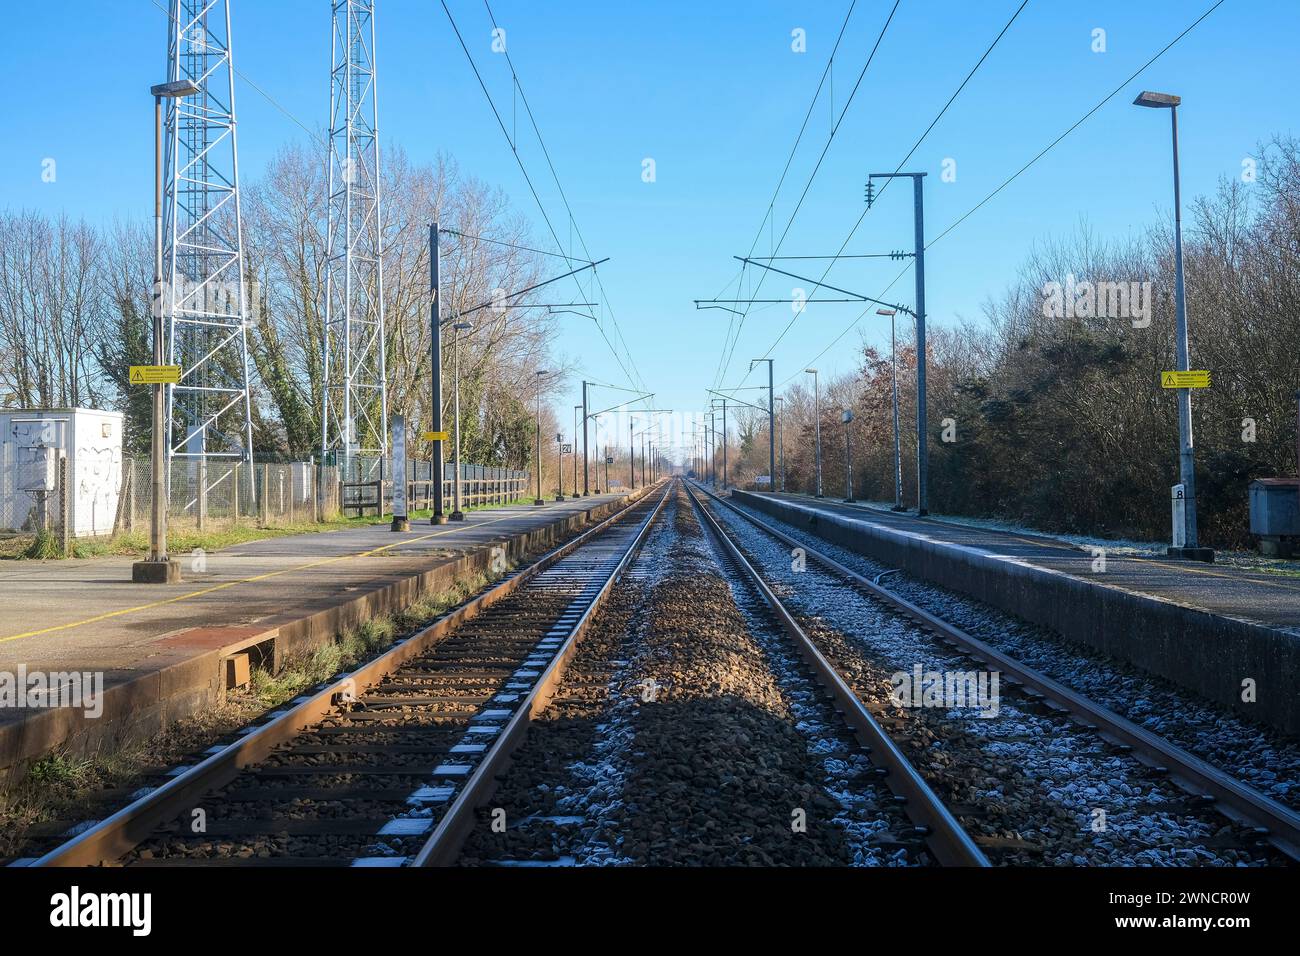 Railway track in france, diminishing perspective Stock Photo